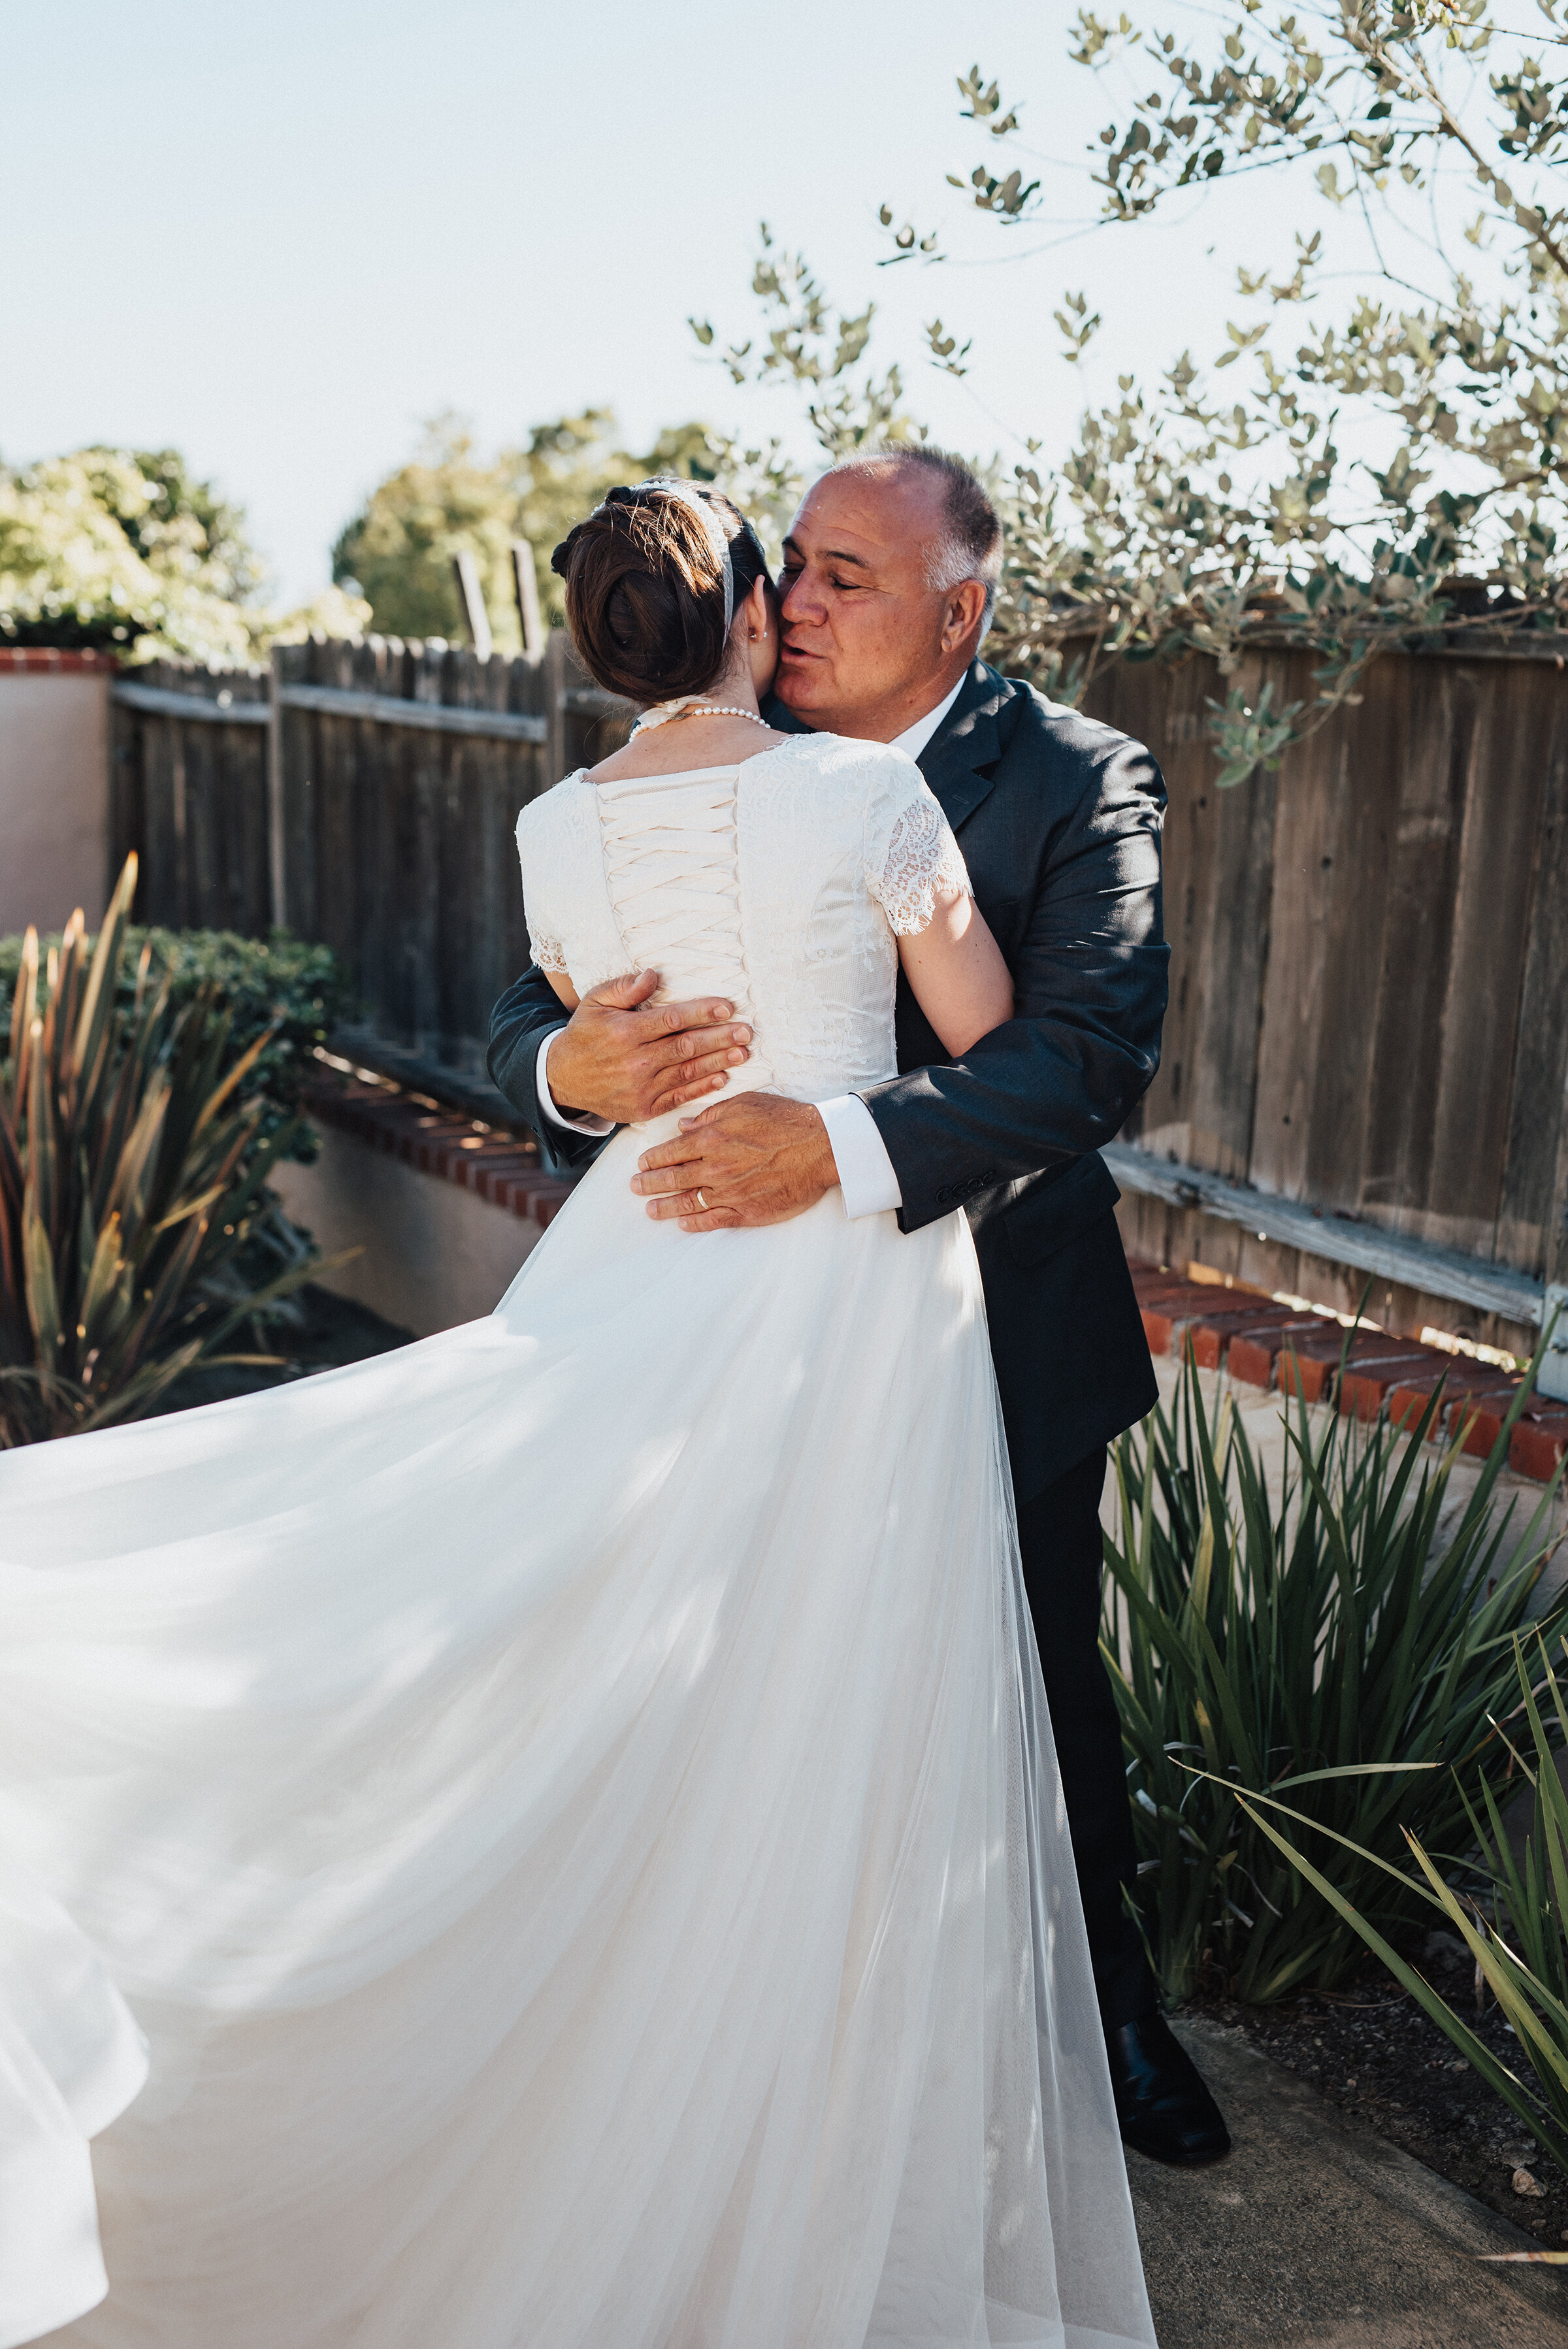  Sweet first look for Father of the bride for this intimate backyard wedding in Laguna Beach. Kristi Alyse photography Laguna Beach wedding California brides Logan Utah wedding photographer backyard wedding destination photographer covid wedding bride and groom #kristialysephotography #weddingphotography #Lagunabeach #destinationphotographer #weddingday #love #backyardwedding #loganutahphotographer #californiawedding #californiabrides 